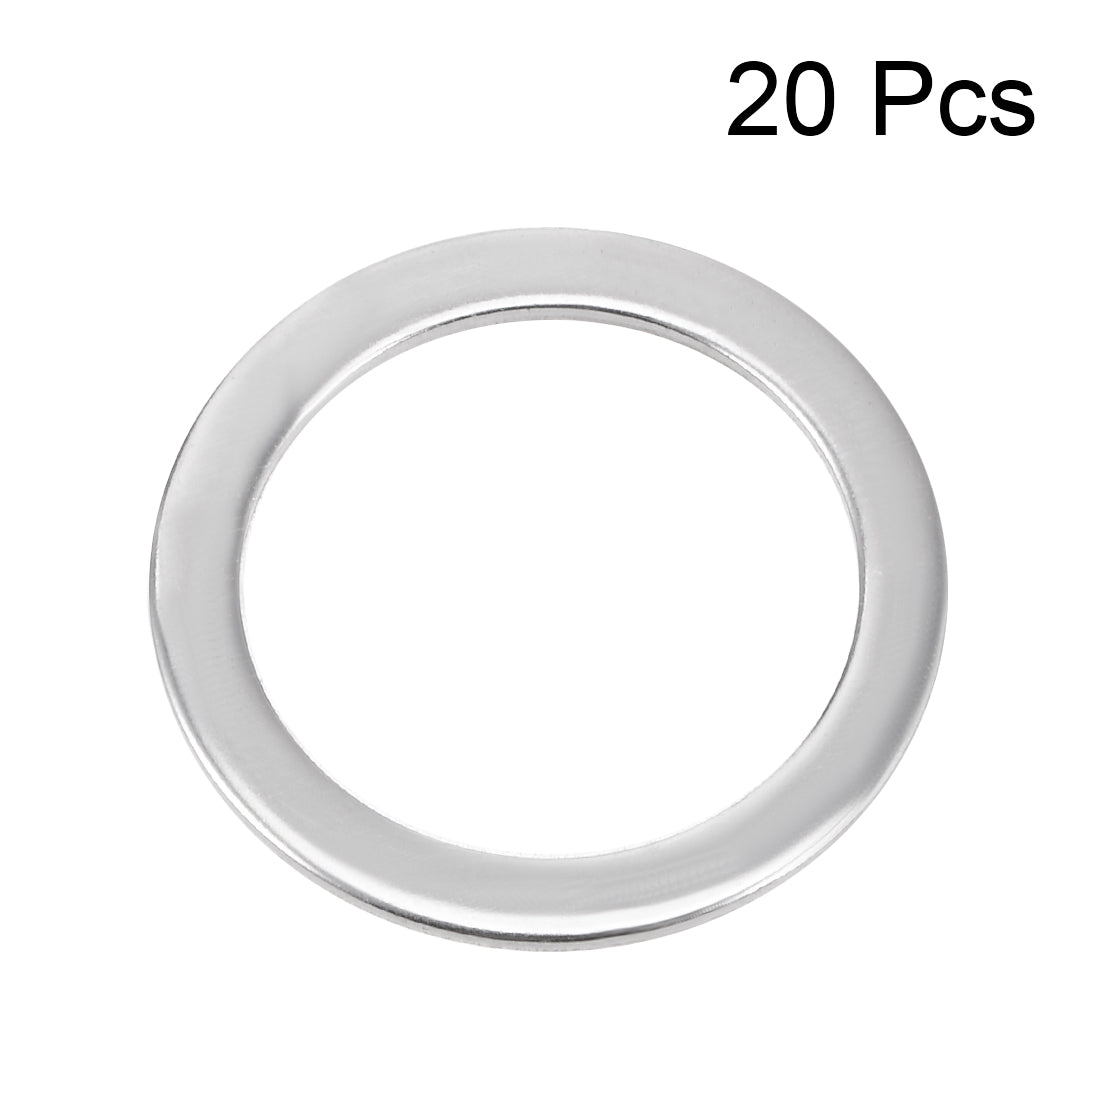 uxcell Uxcell 20Pcs 14mm x 20mm x 0.8mm 304 Stainless Steel Flat Washer for Screw Bolt